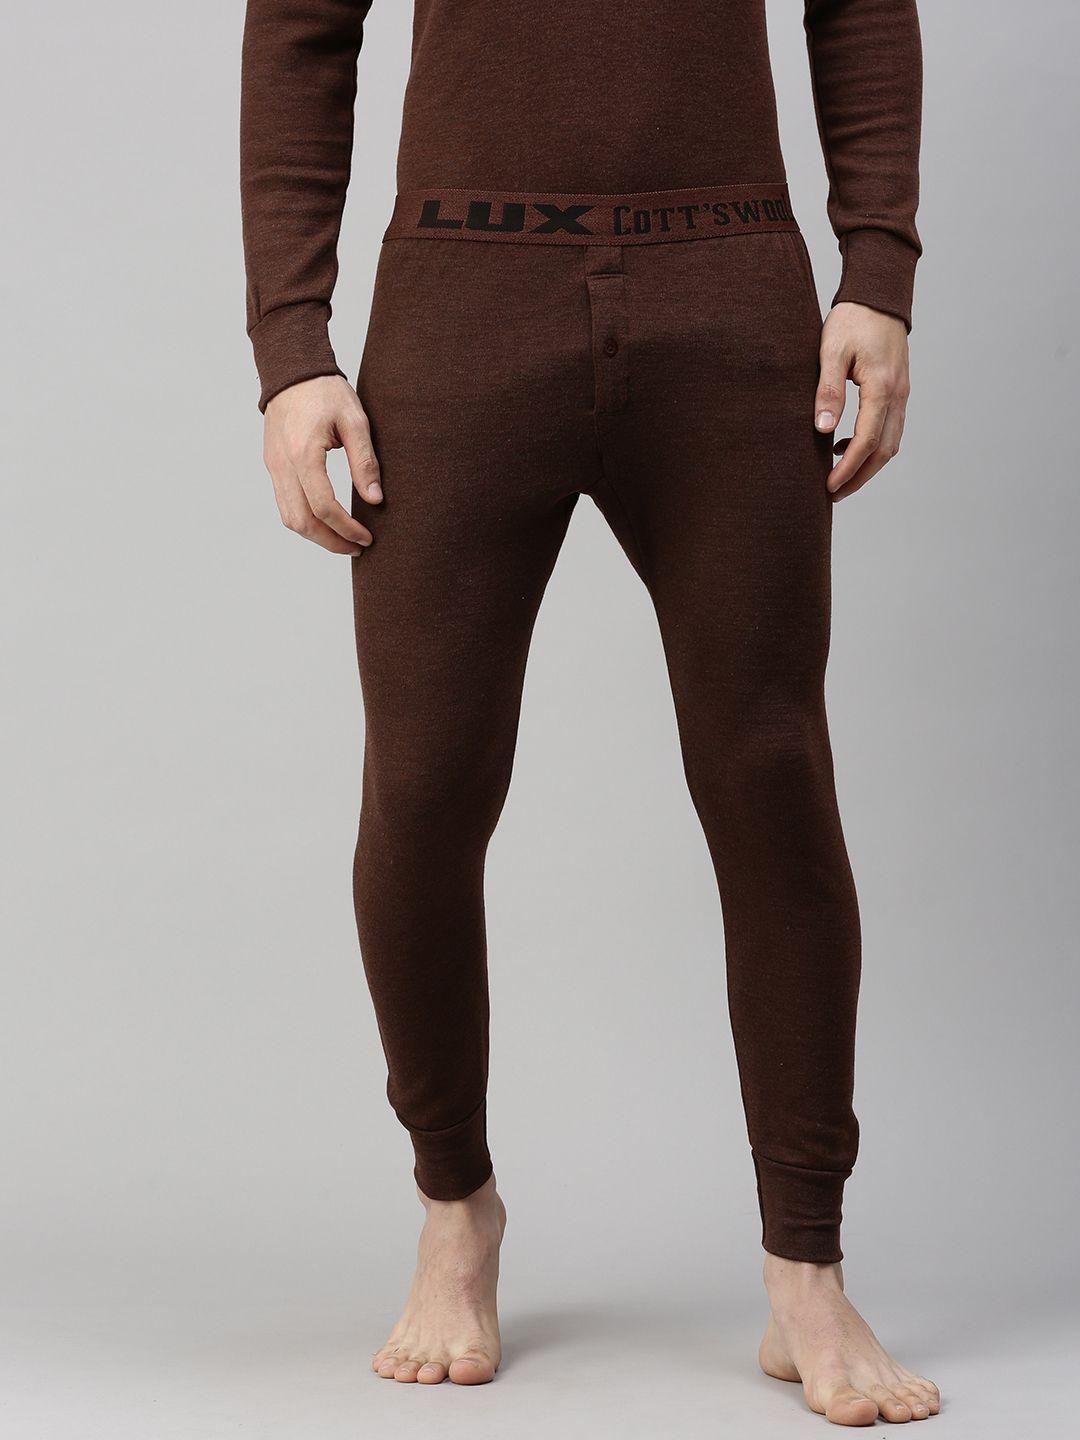 lux cottswool men brown  solid cotton thermal bottom